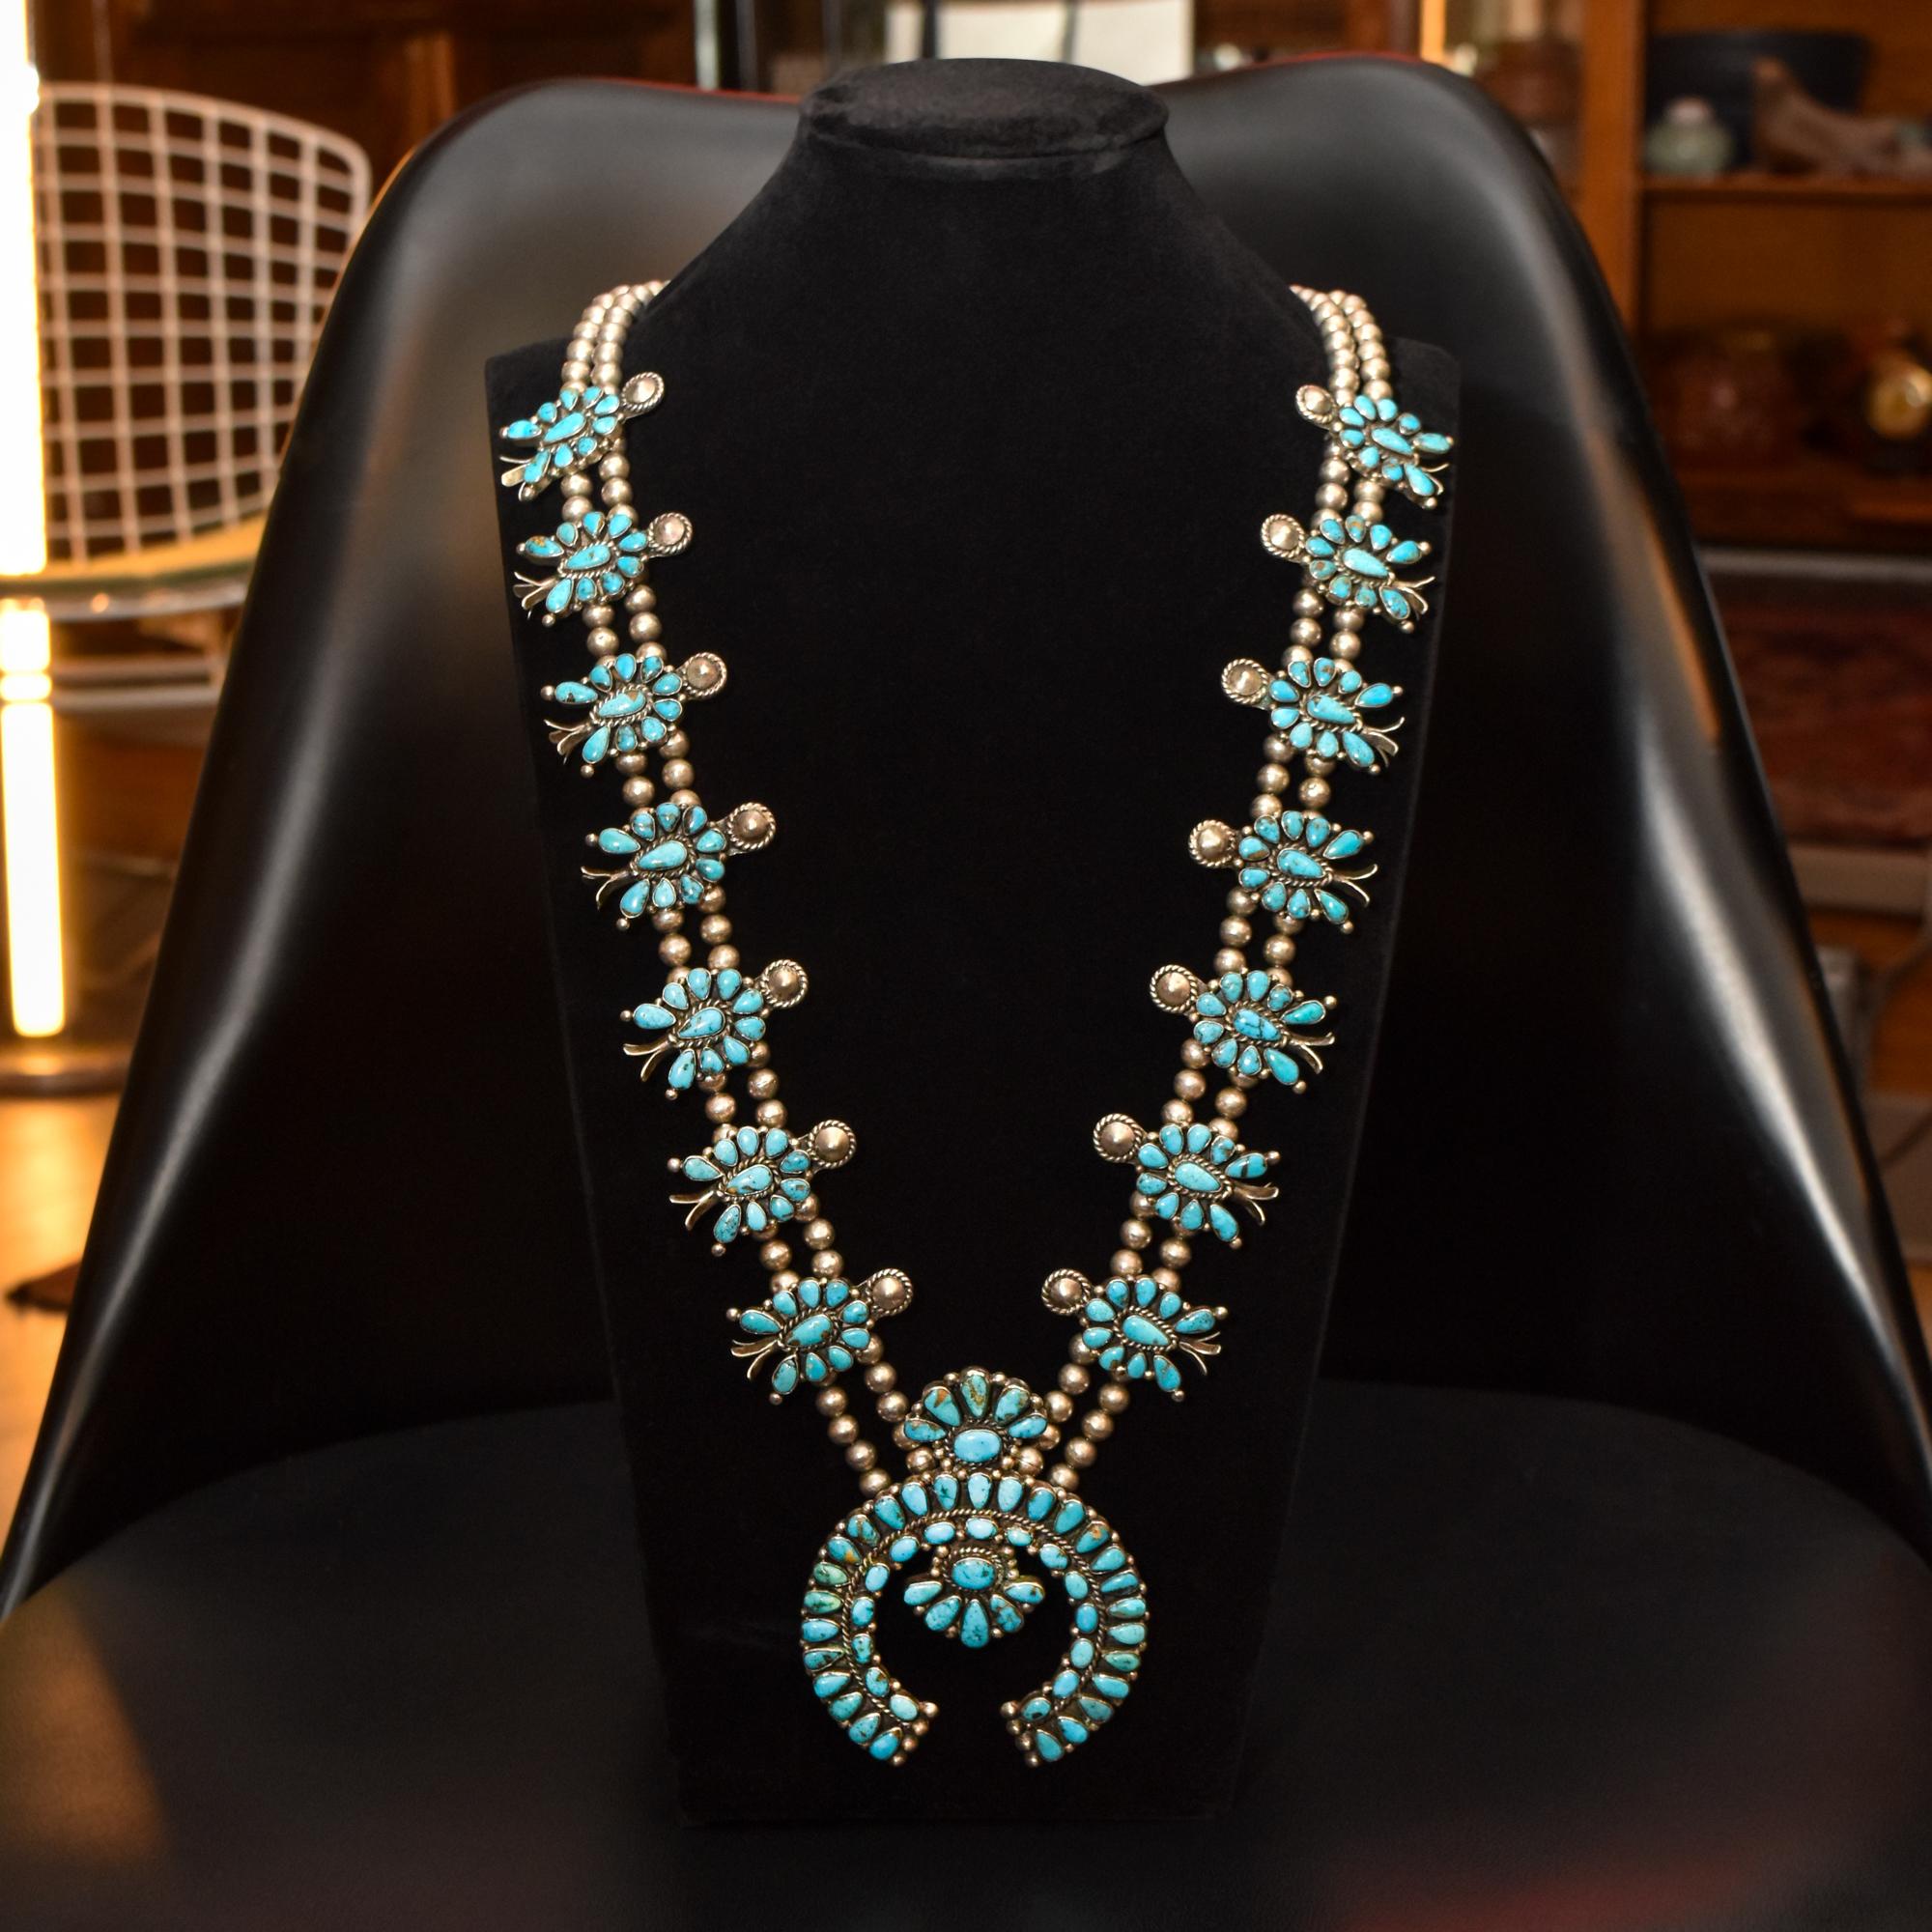 A gorgeous Native American squash blossom necklace with over 190 natural turquoise stones. This beautiful necklace is made from sterling silver and features 14 traditional squash blossoms, a robust Naja pendant, and handmade silver bench beads. The